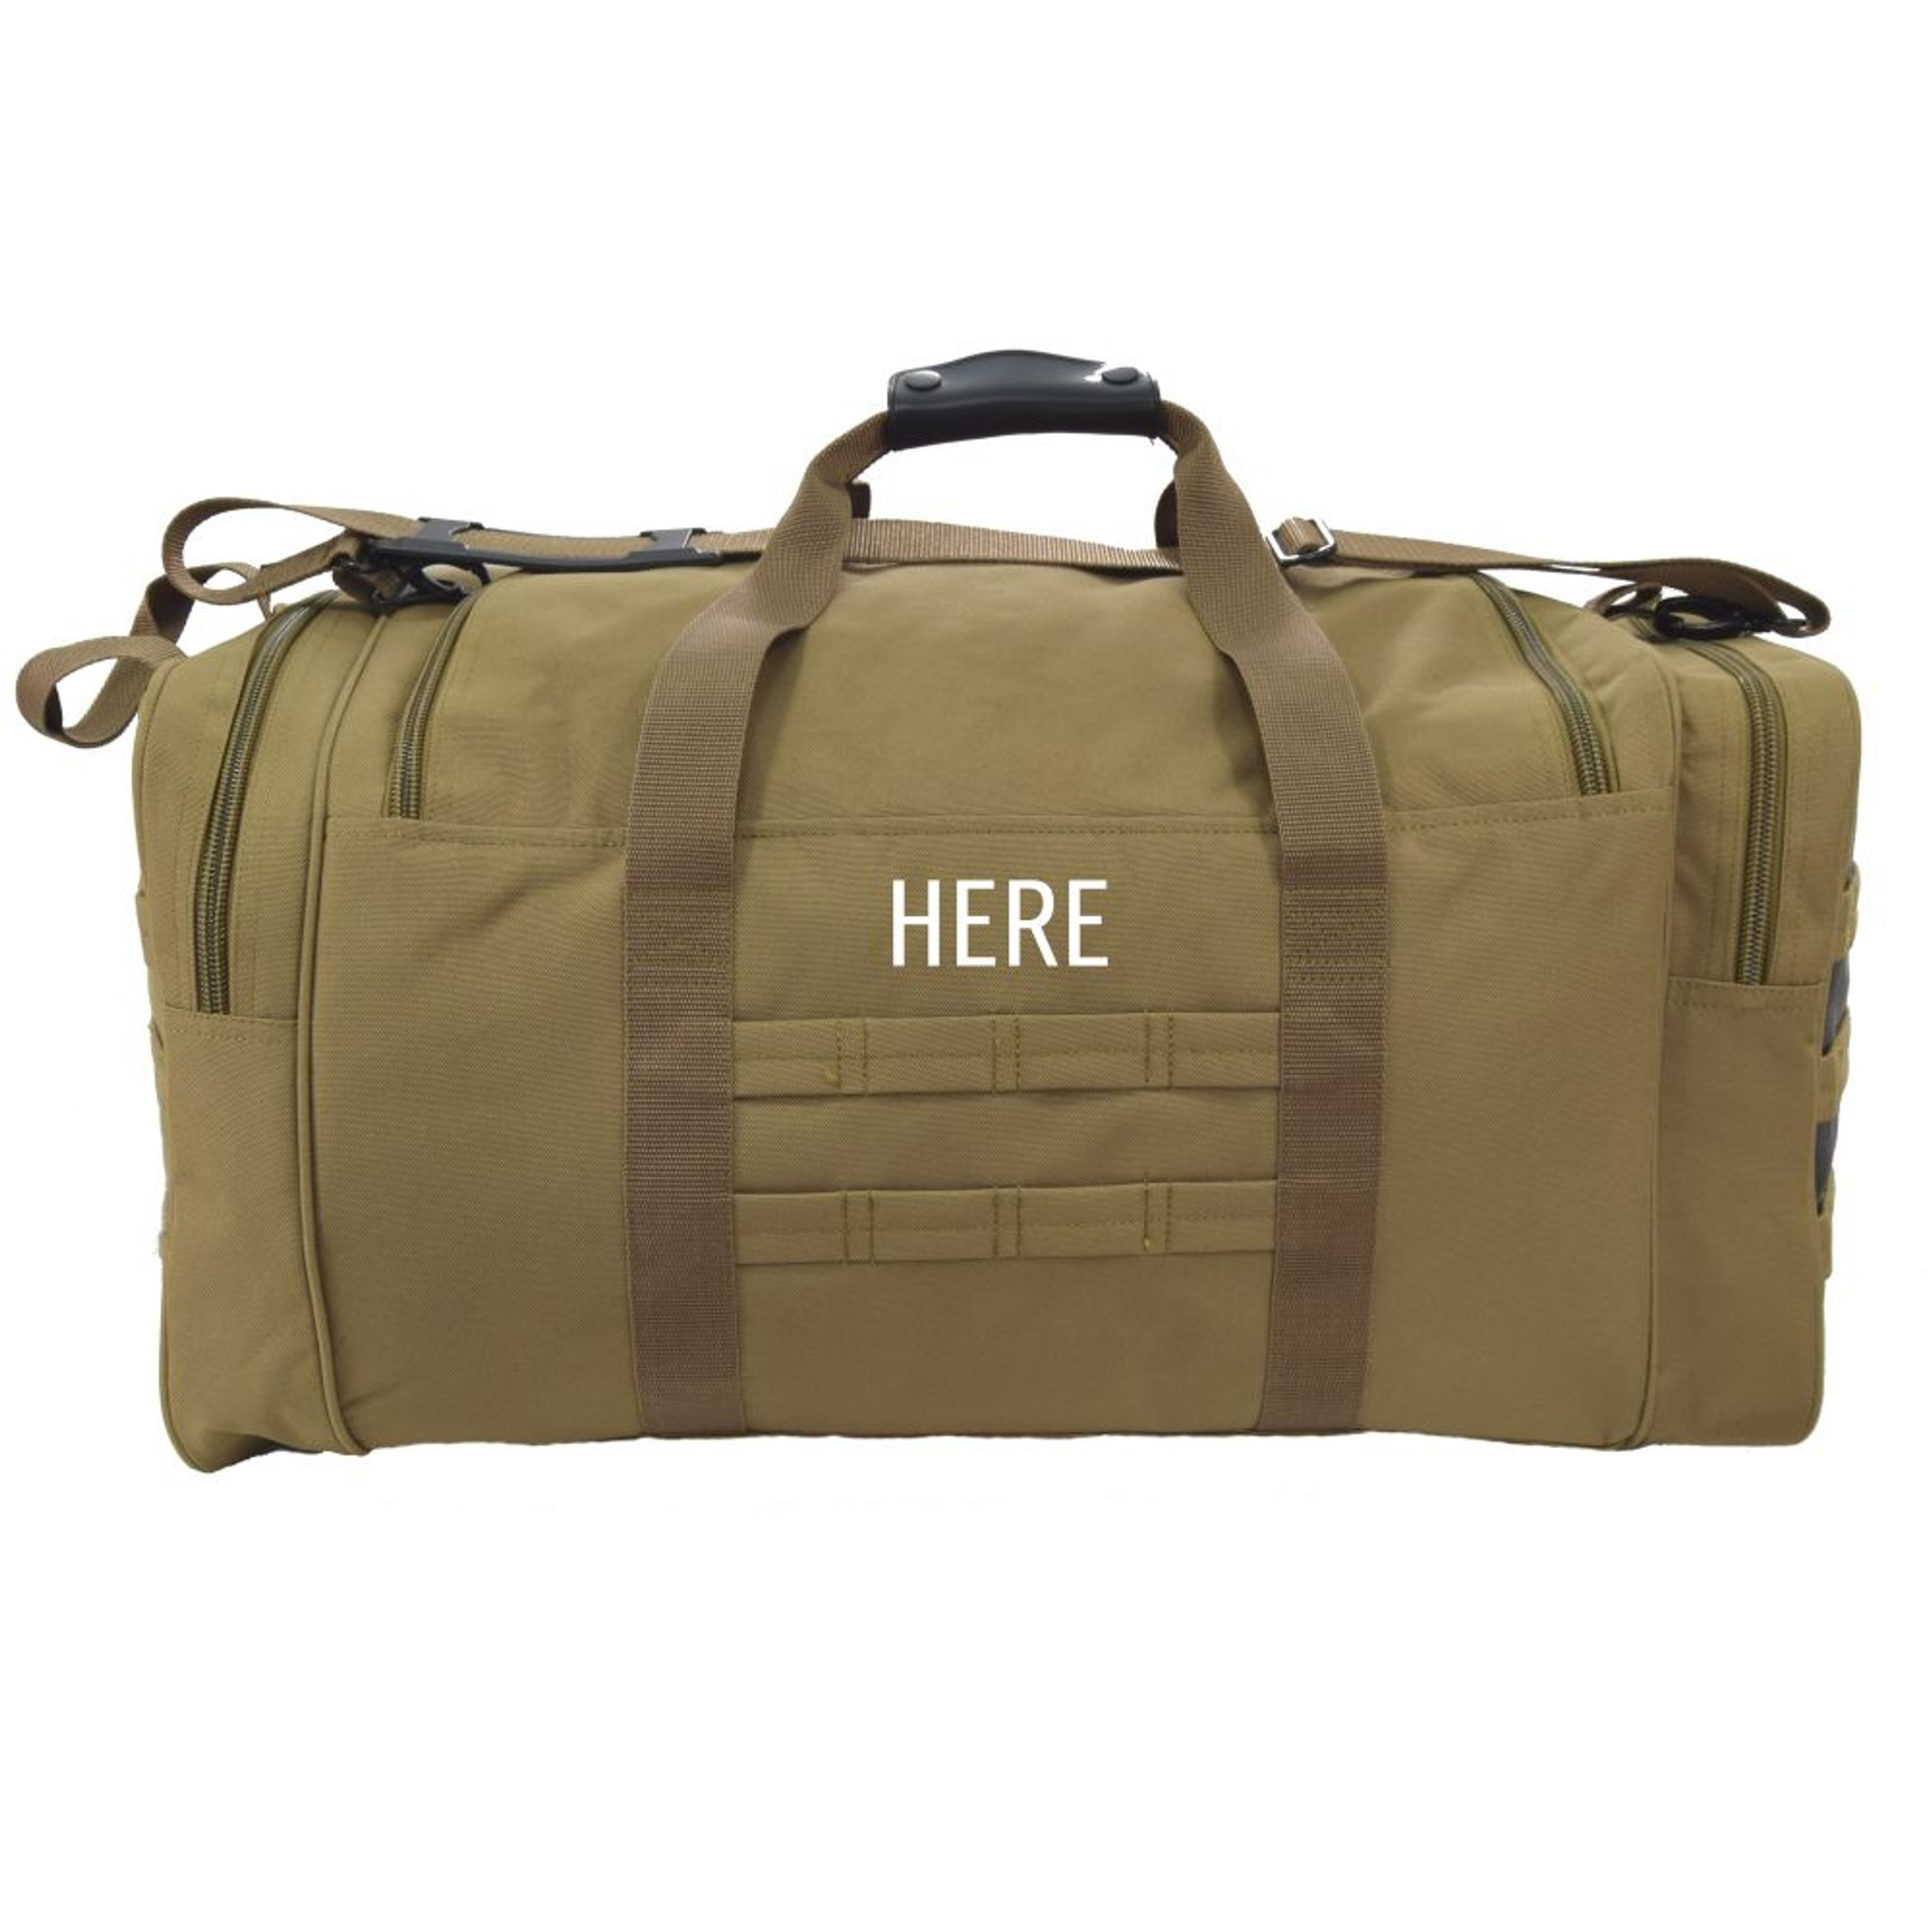 Tactical Duffle Bags MOLLE Gear Military Travel Shoulder Gym Bag 